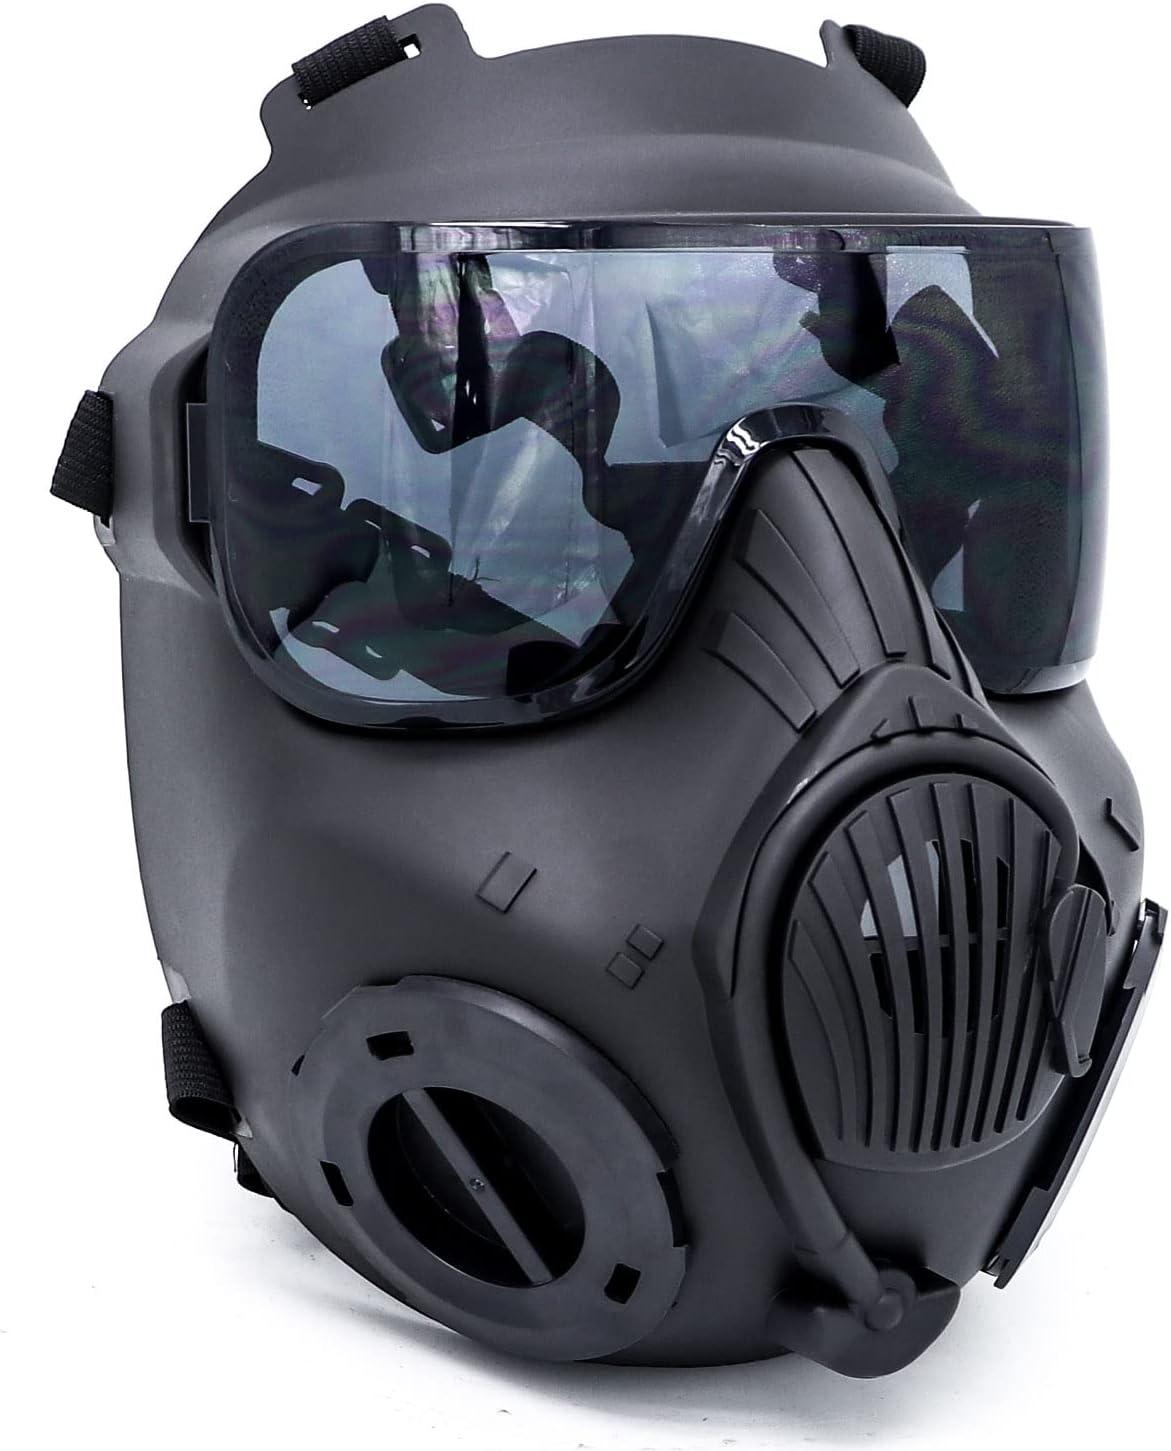 Full Face Skull Mask for Airsoft with Metal Mesh Eyes, Black